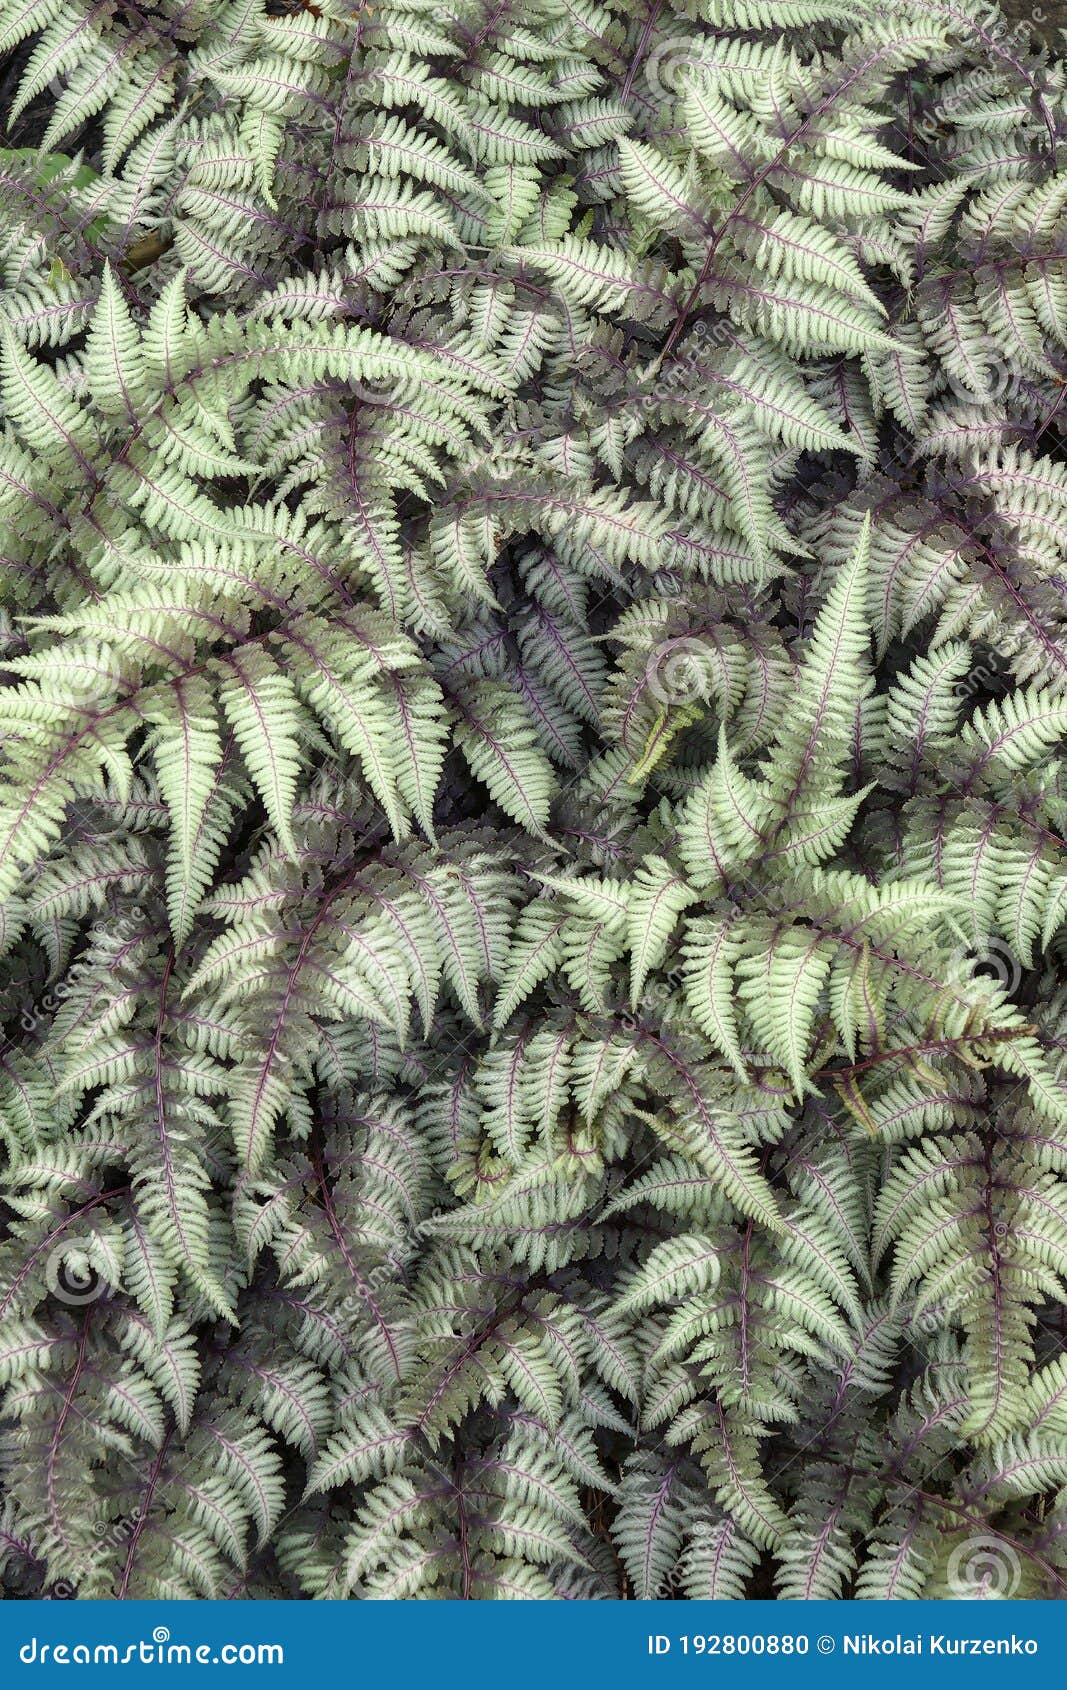 close-up image of ghost fern